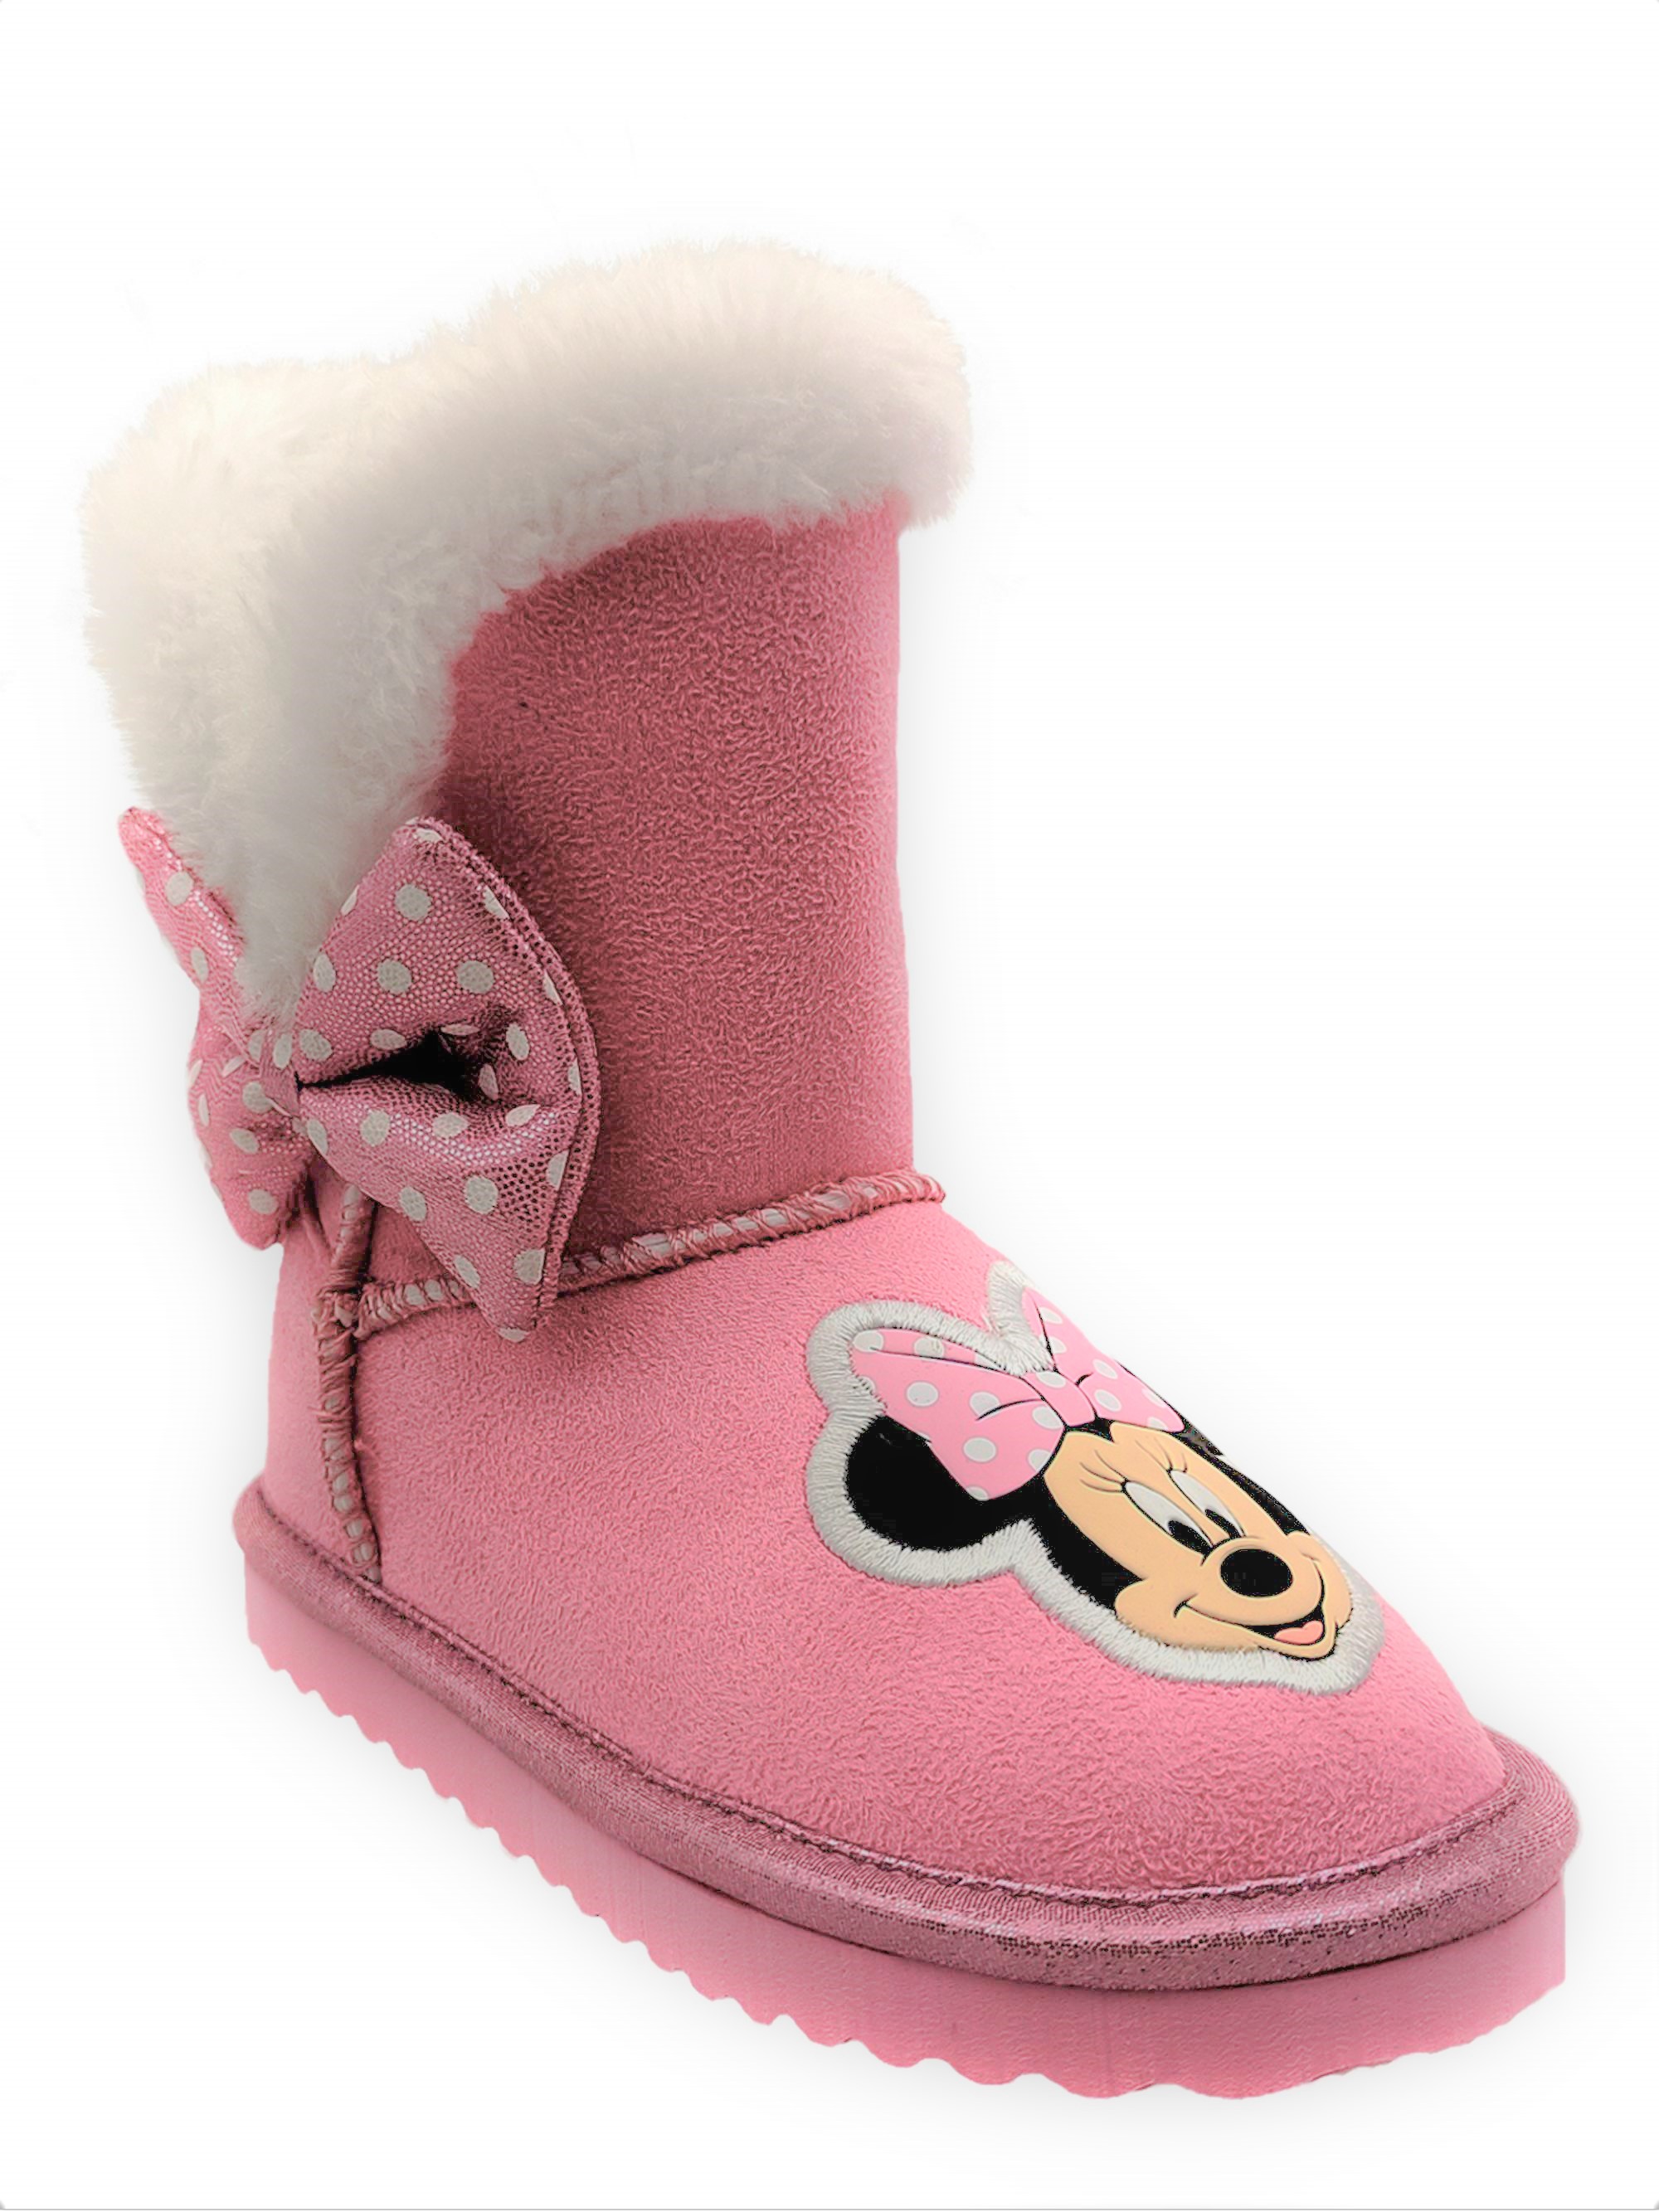 Disney Boots Clearance 11.99-12.99 40-60% off fs @35